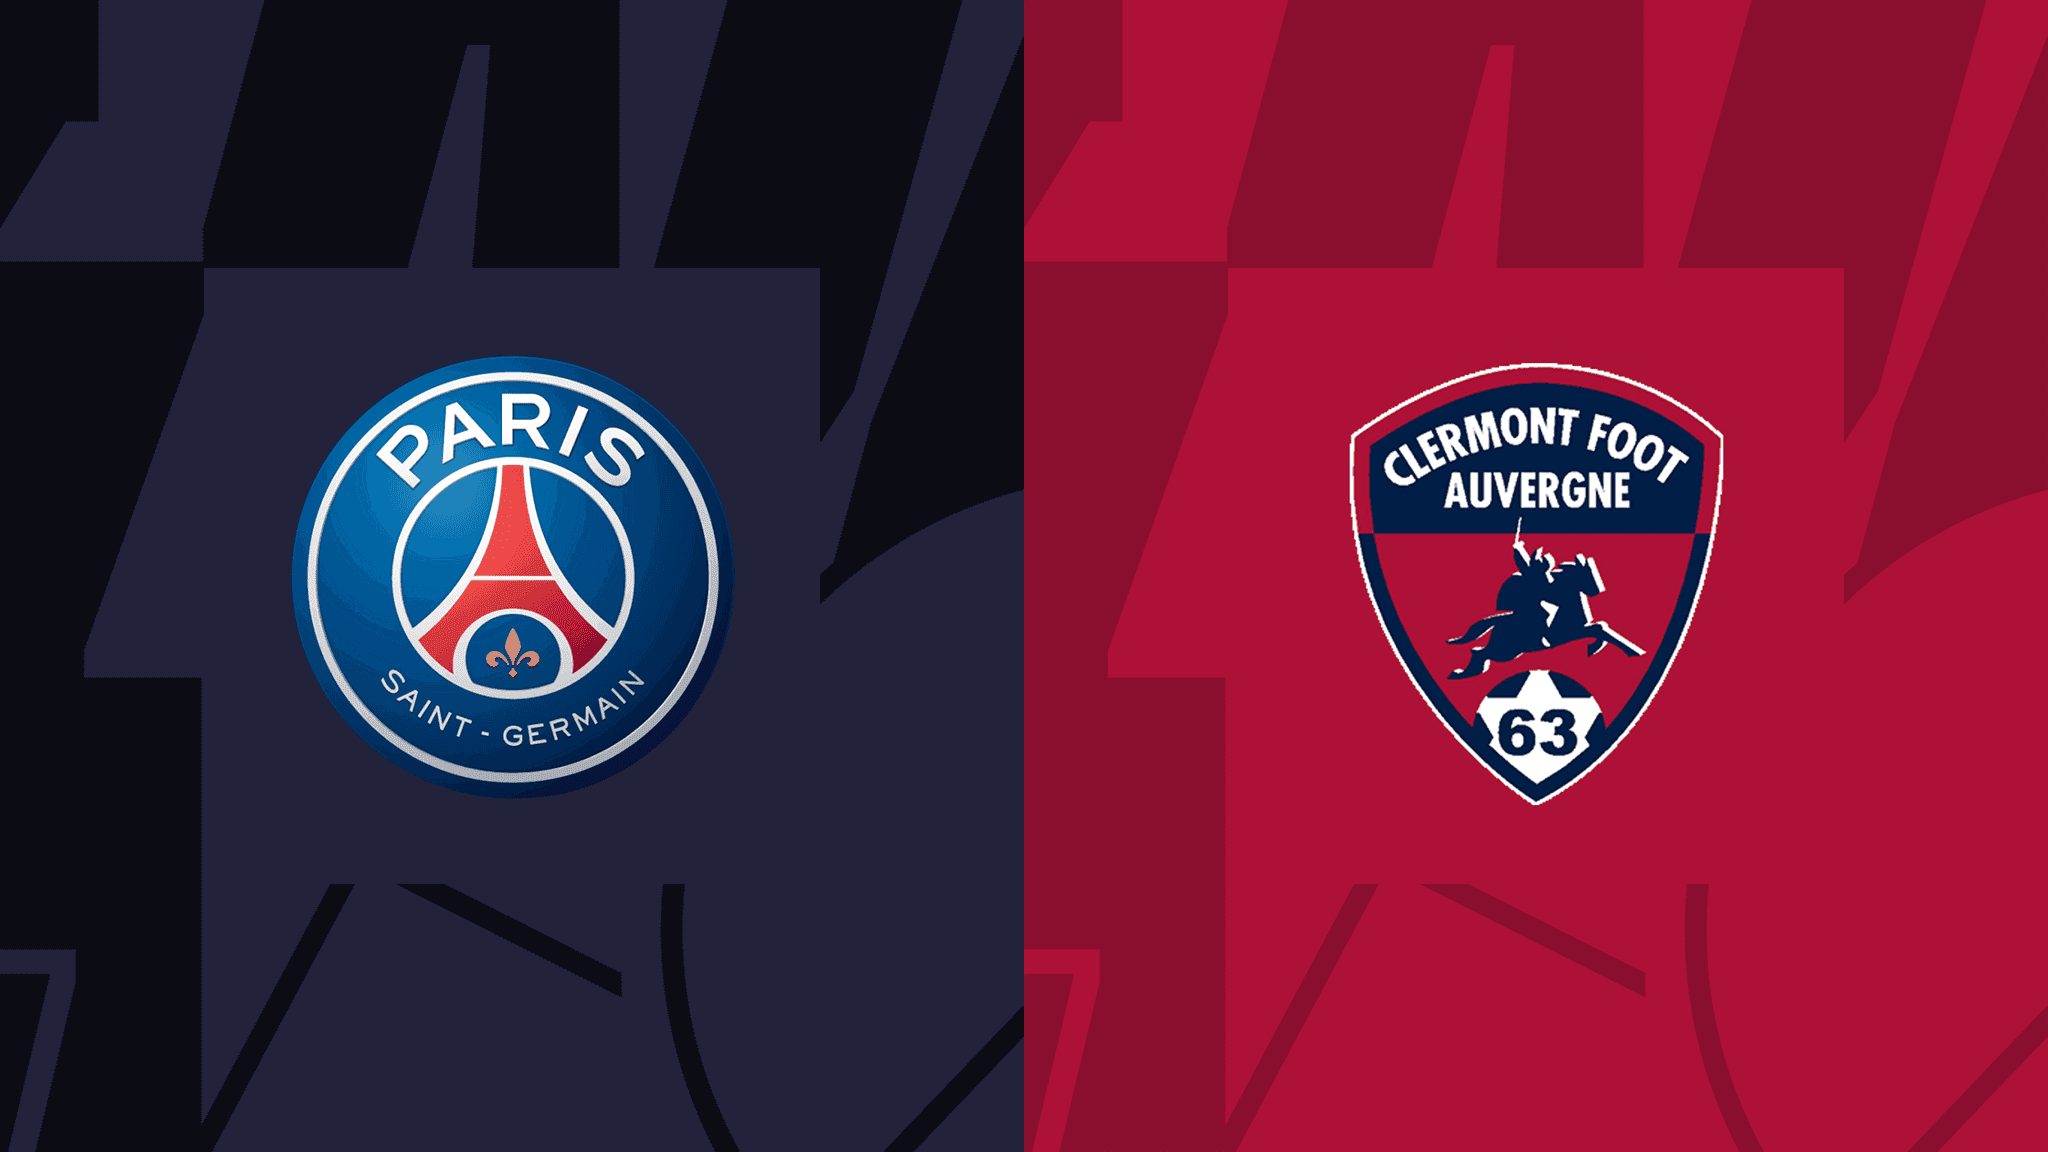 How to Watch Paris Saint-Germain vs Clermont: Live Stream, TV Channel, Start Time